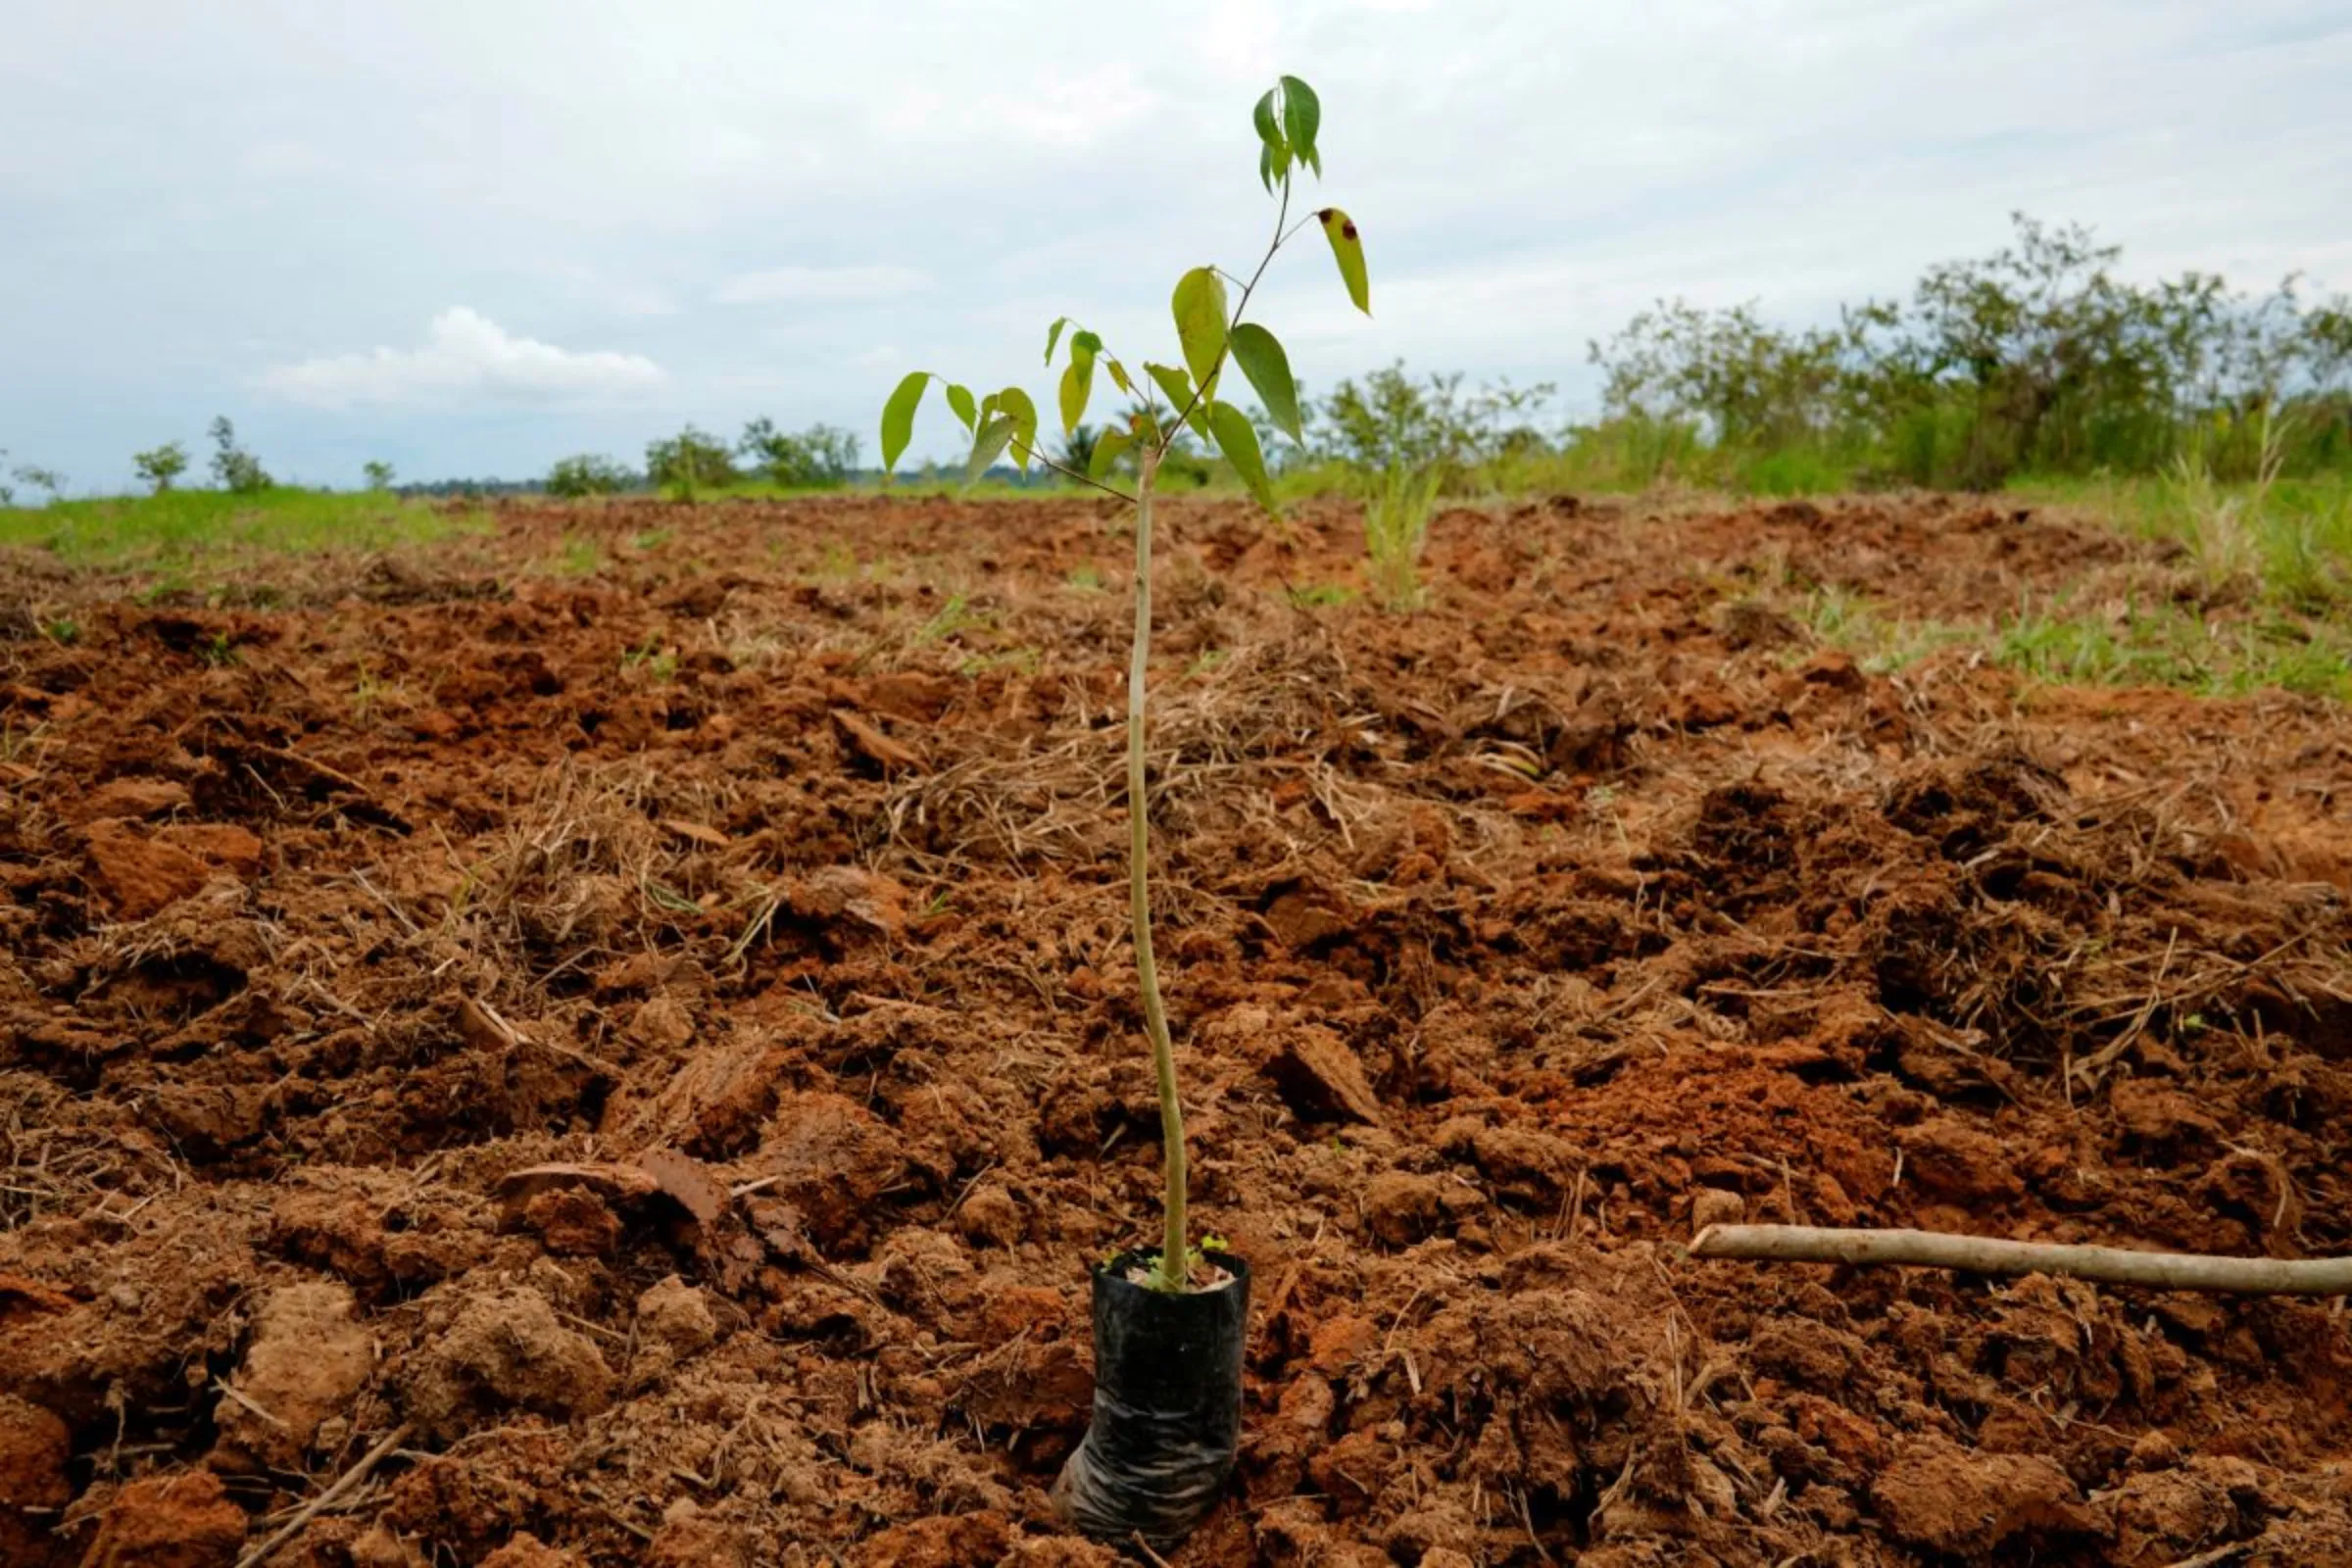 A view of a plant grown in the non-profit group Rioterra's nursery is about to be planted on a piece of deforested land, in Porto Velho, Rondonia state, Brazil February 19, 2020. REUTERS/Alexandre Meneghini